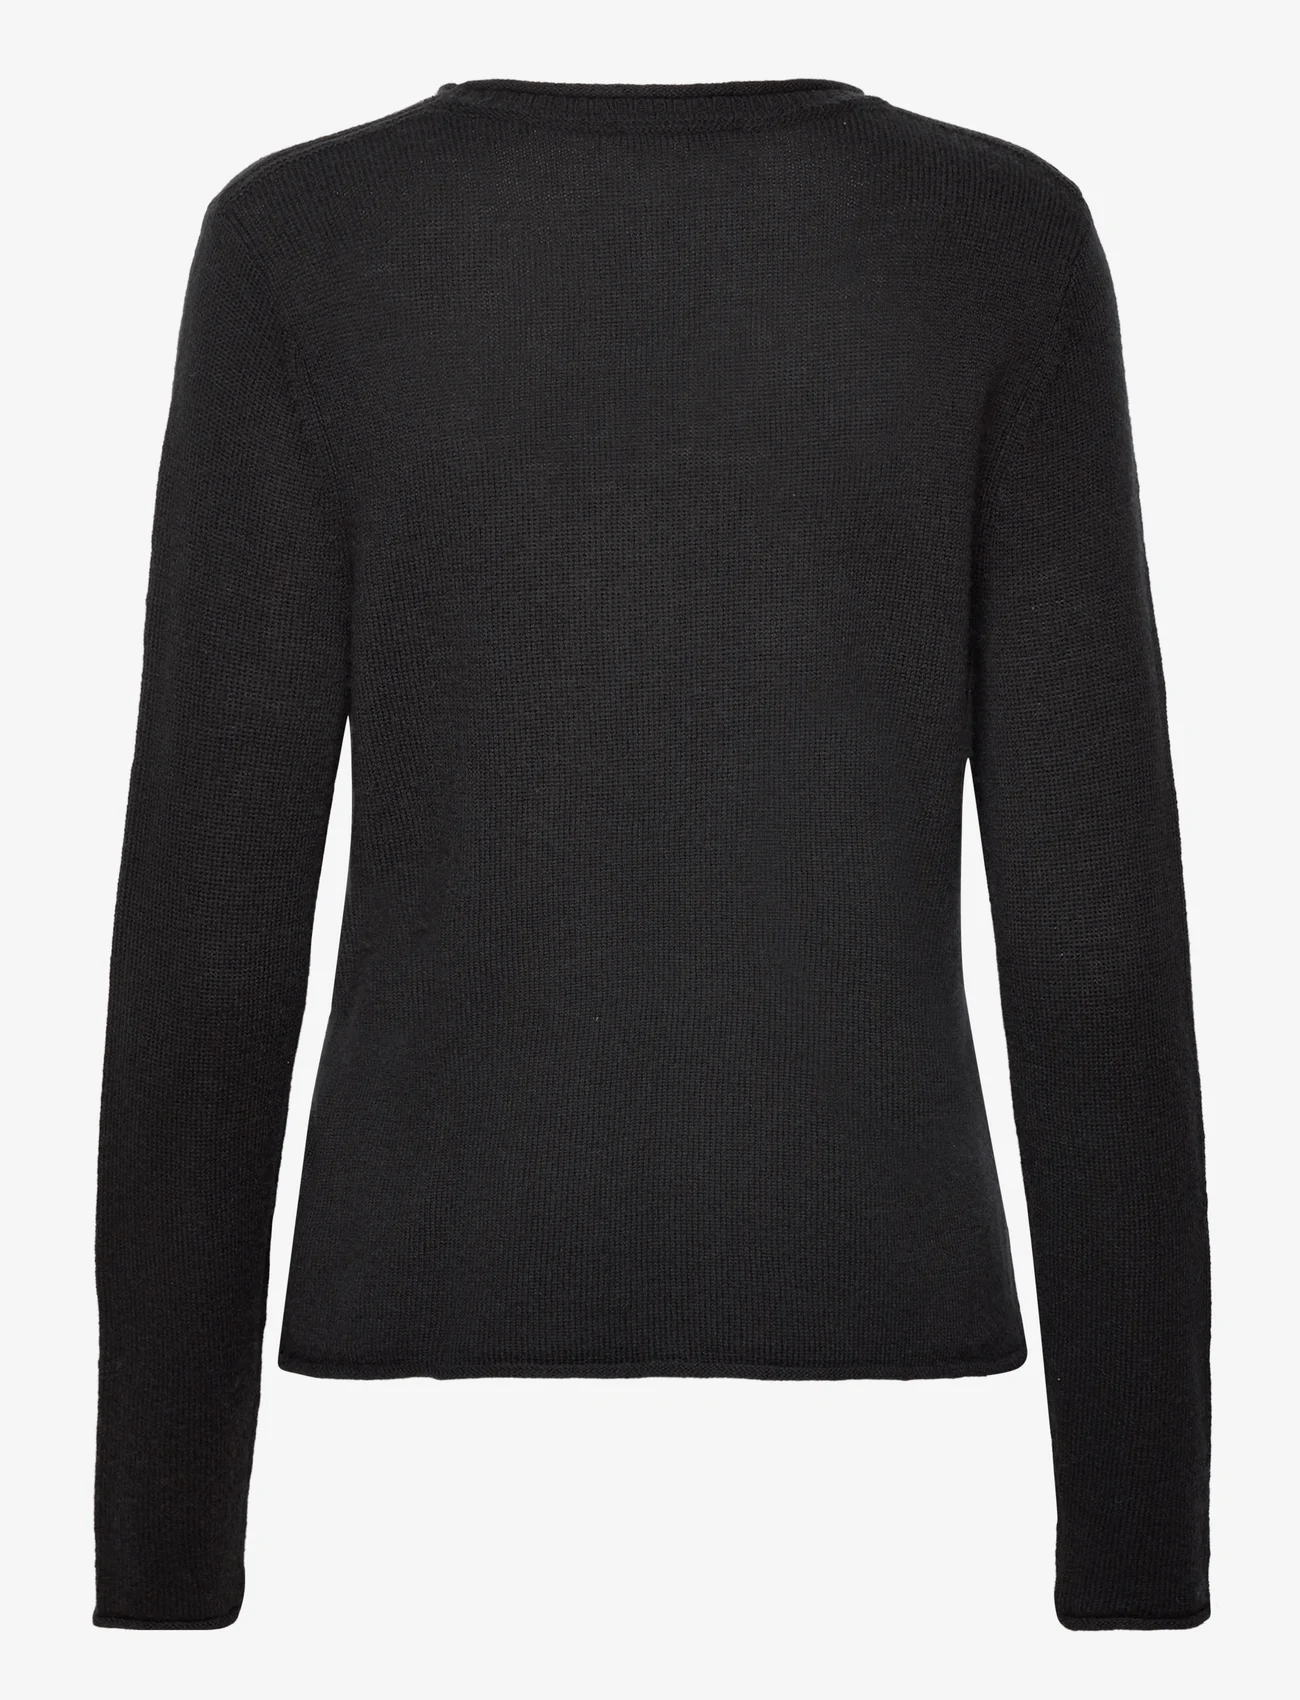 Tommy Hilfiger - SOFT WOOL C-NK SWEATER - pullover - black - 1